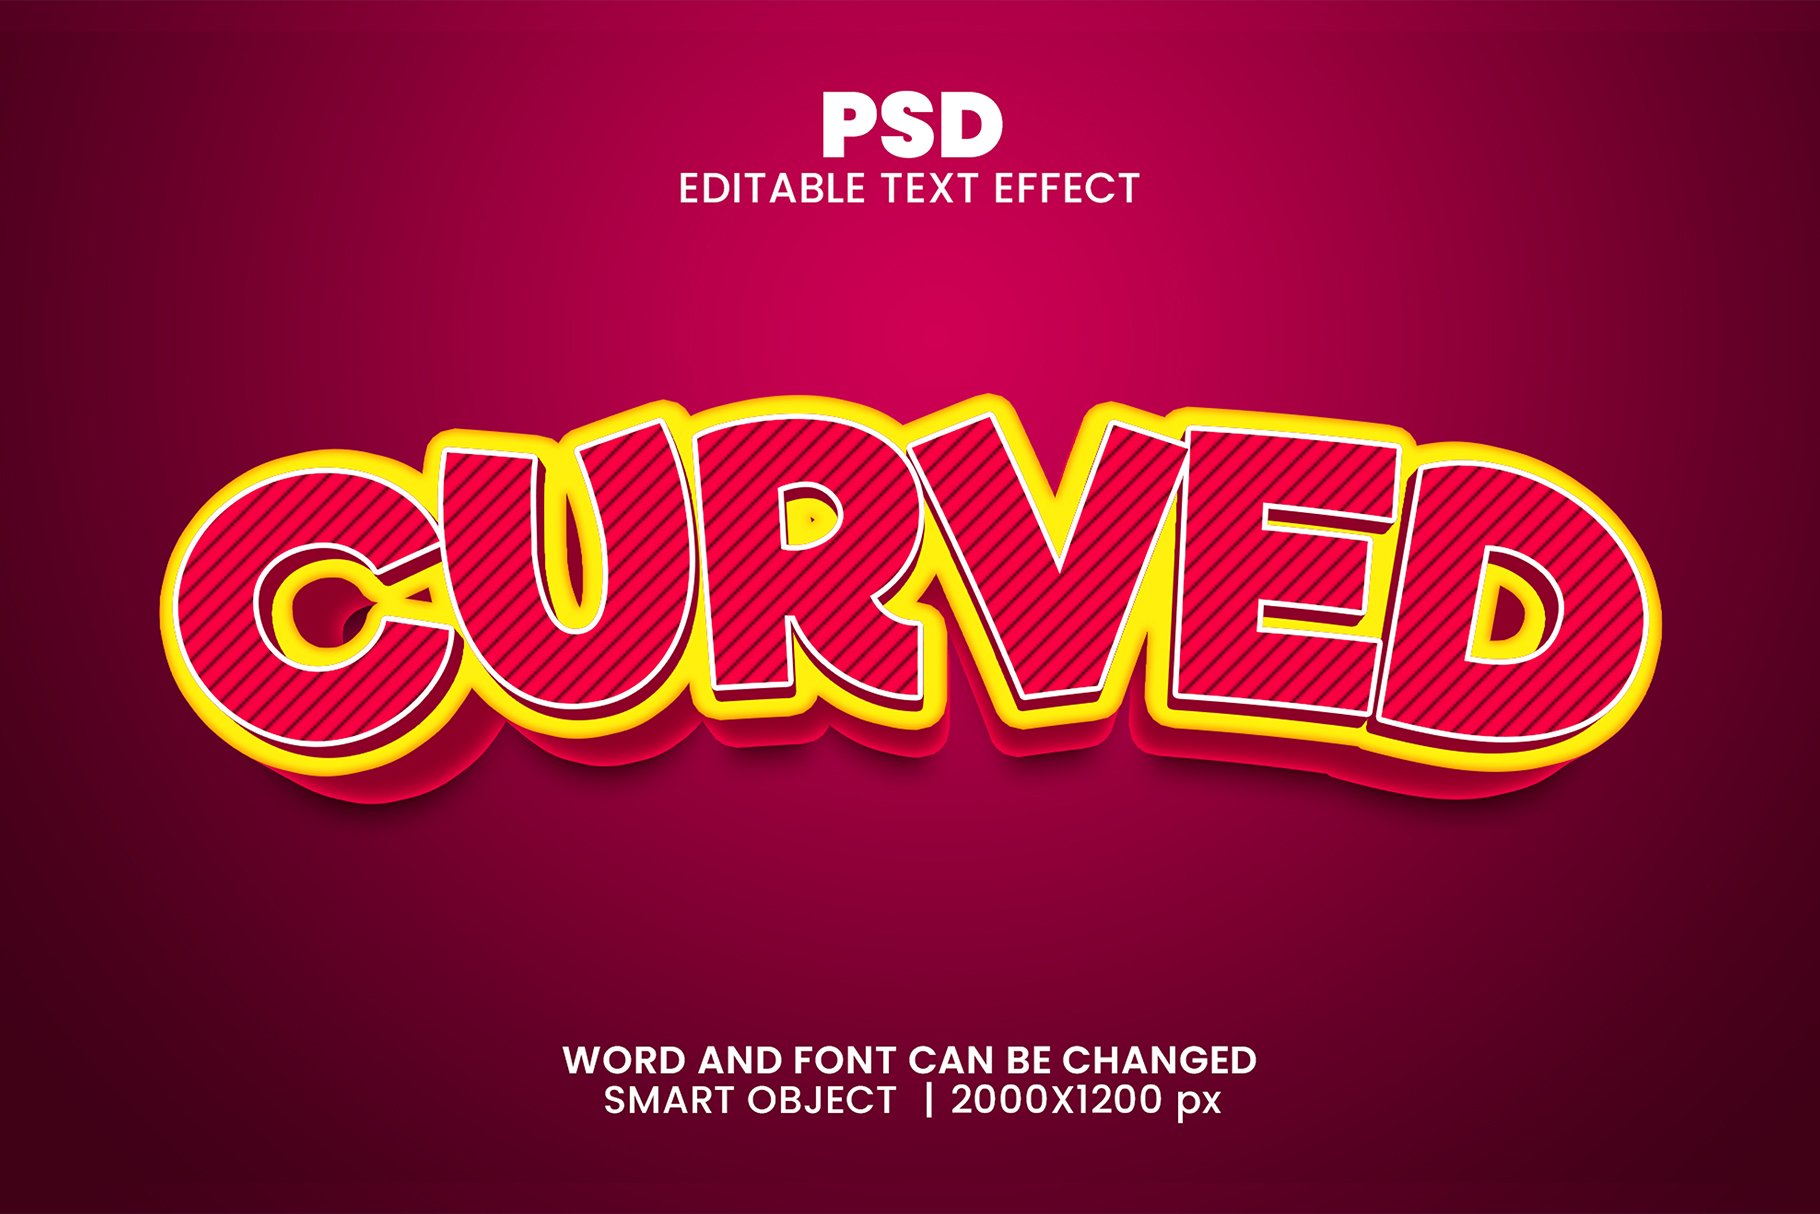 Curved 3d Editable Text Effect Stylecover image.